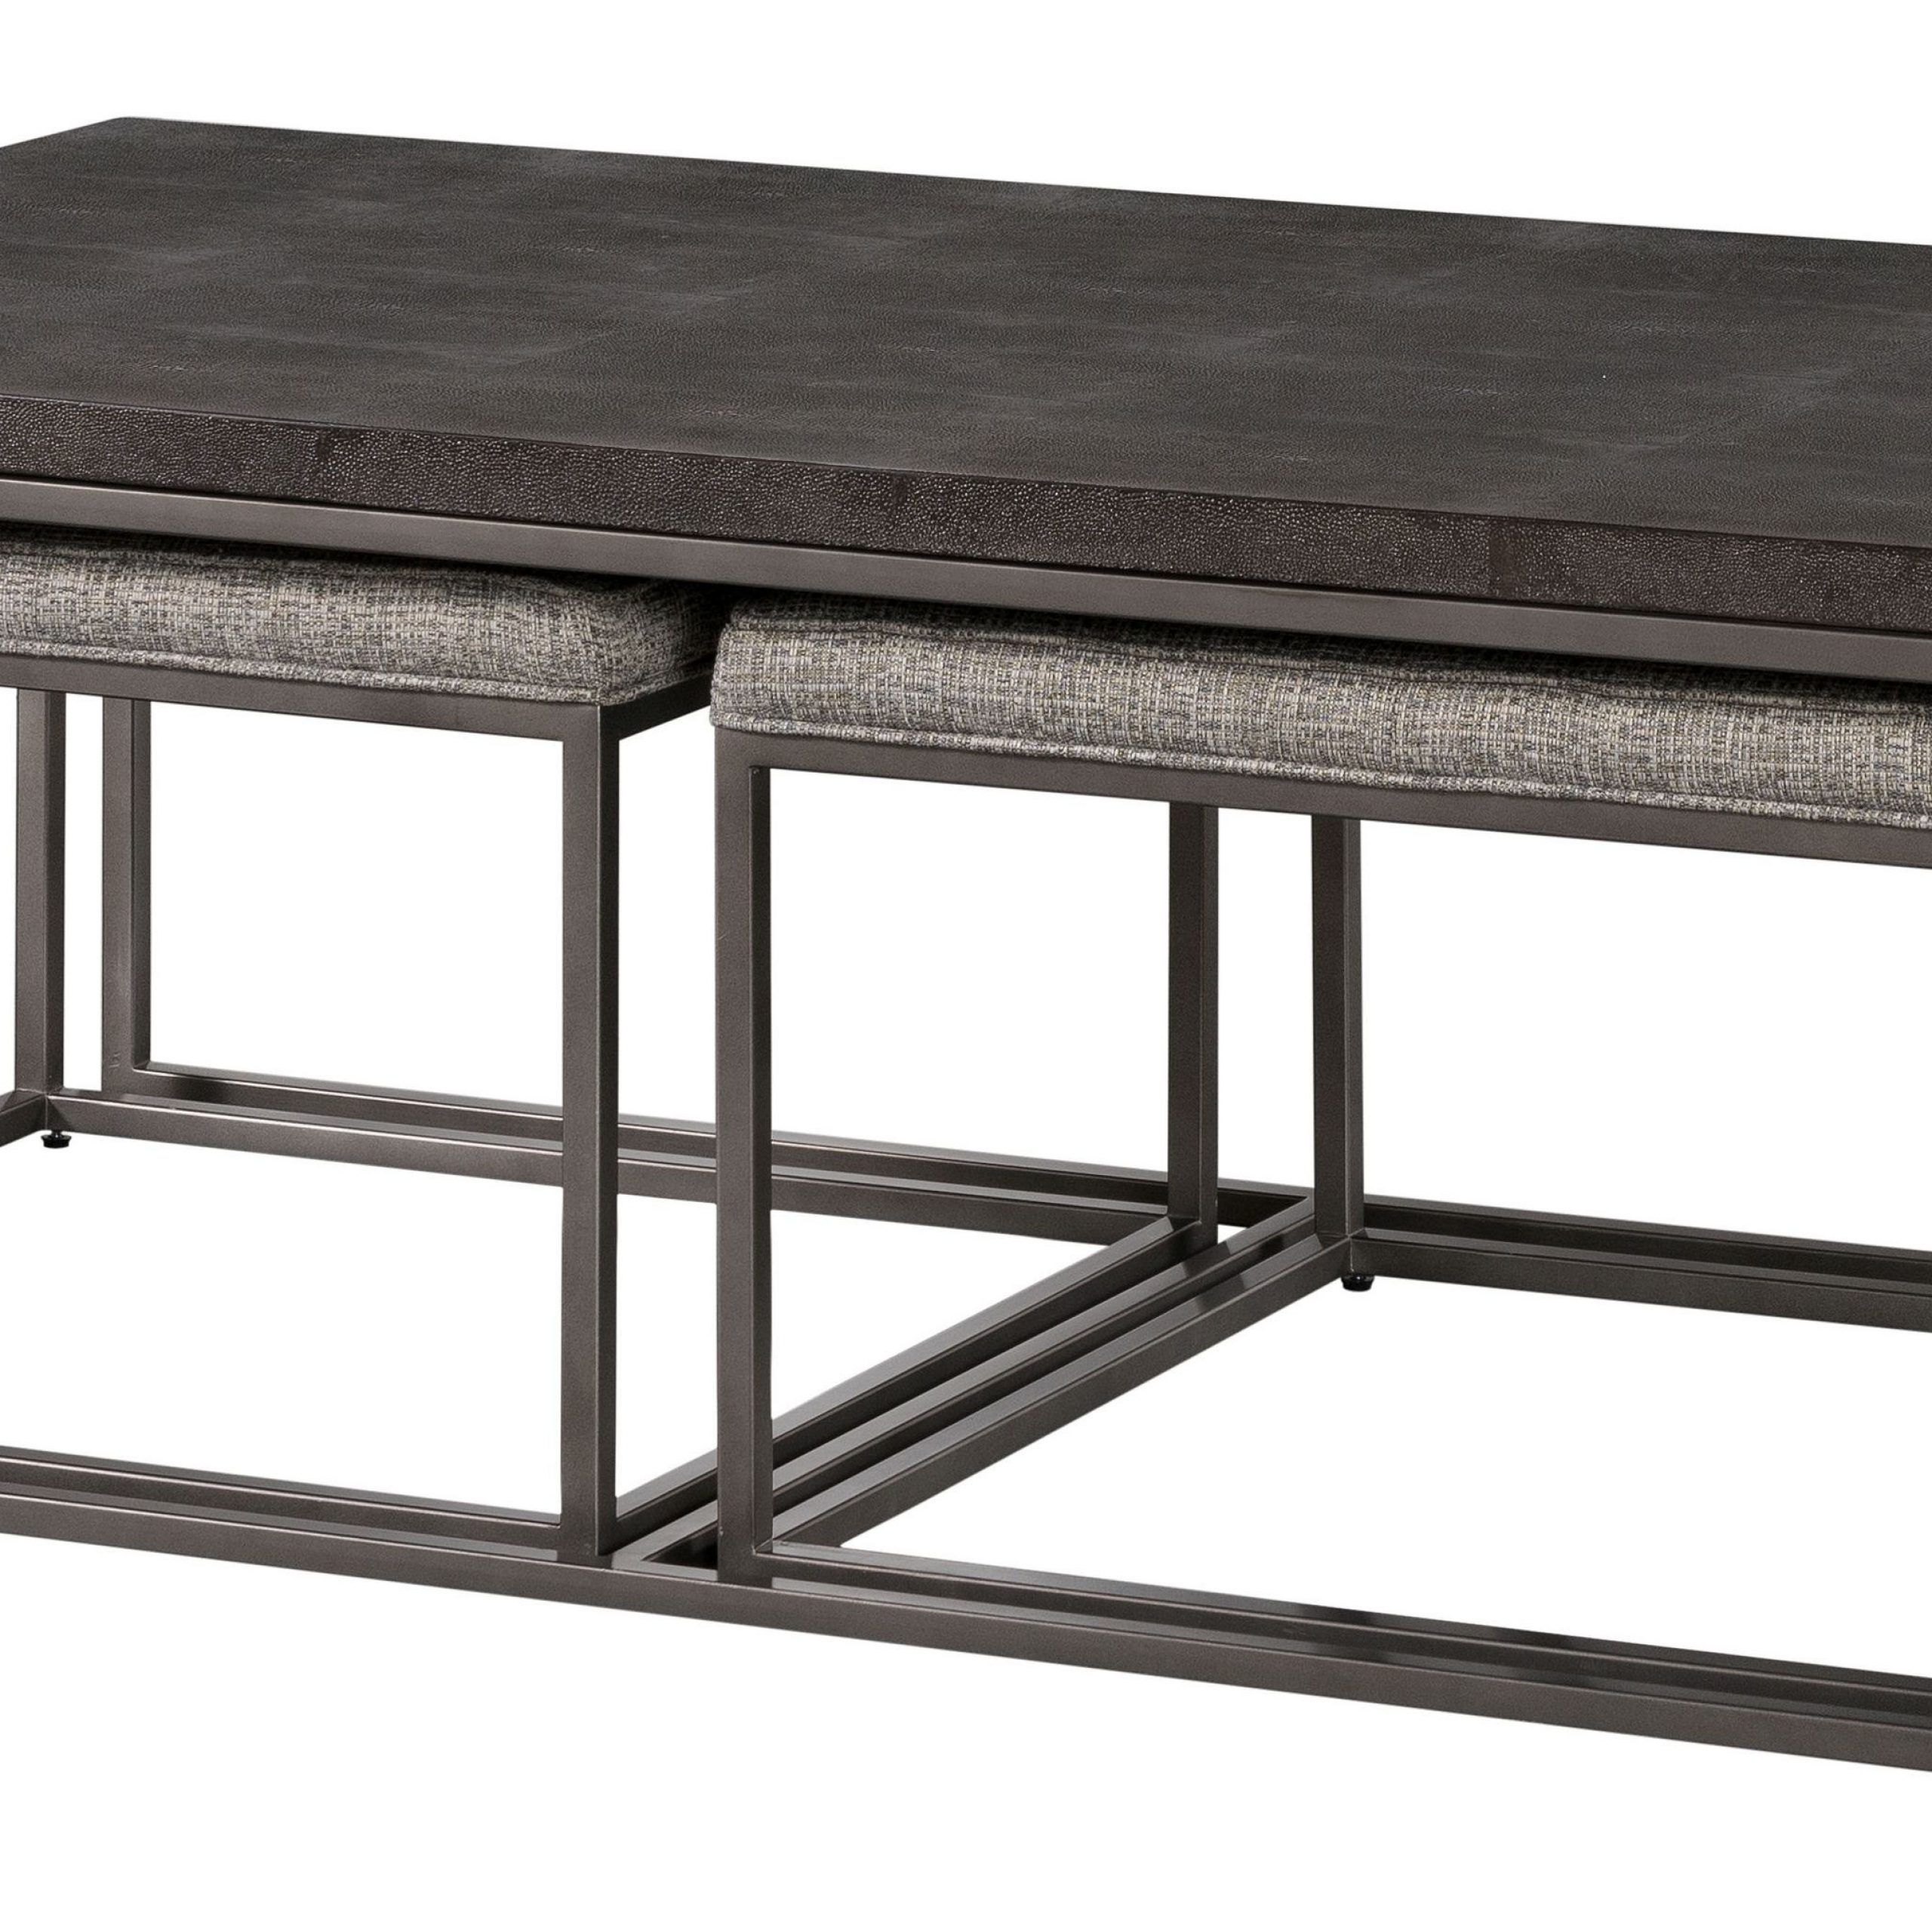 Famous Lane Furniture Charcoal Wood Gunmetal Cocktail Table With Nesting With Regard To Nesting Cocktail Tables (View 6 of 10)